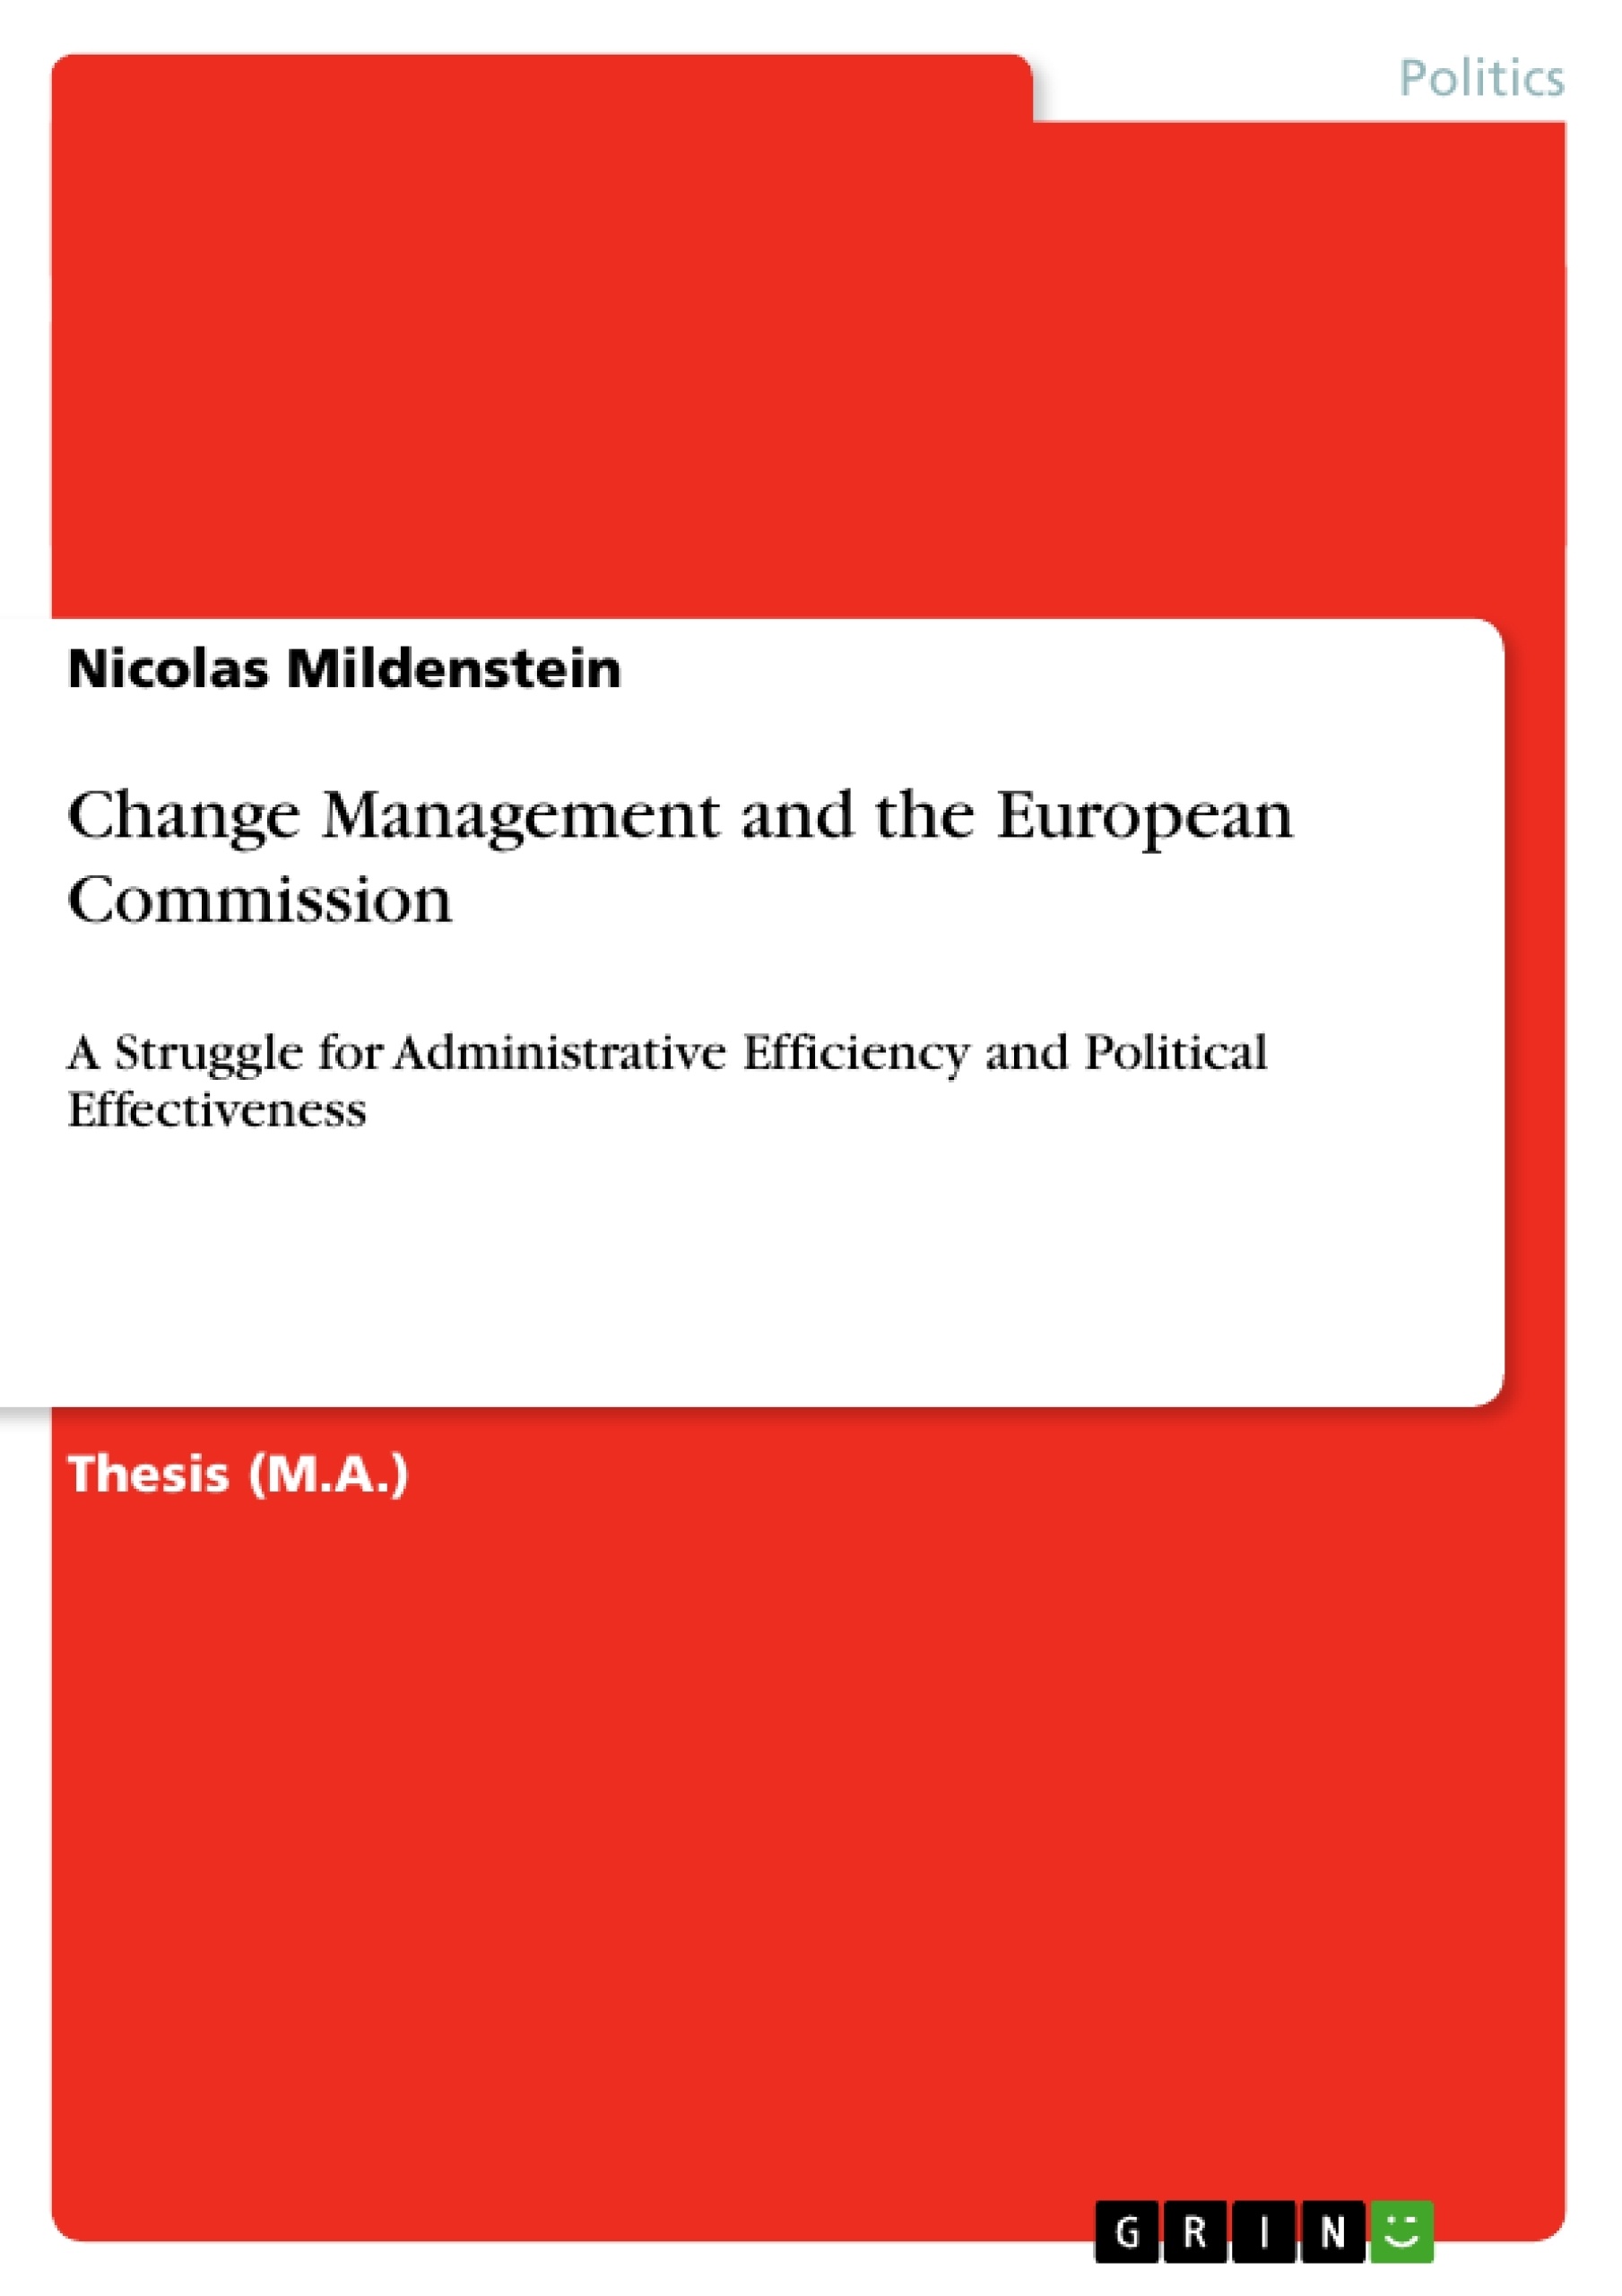 Title: Change Management and the European Commission